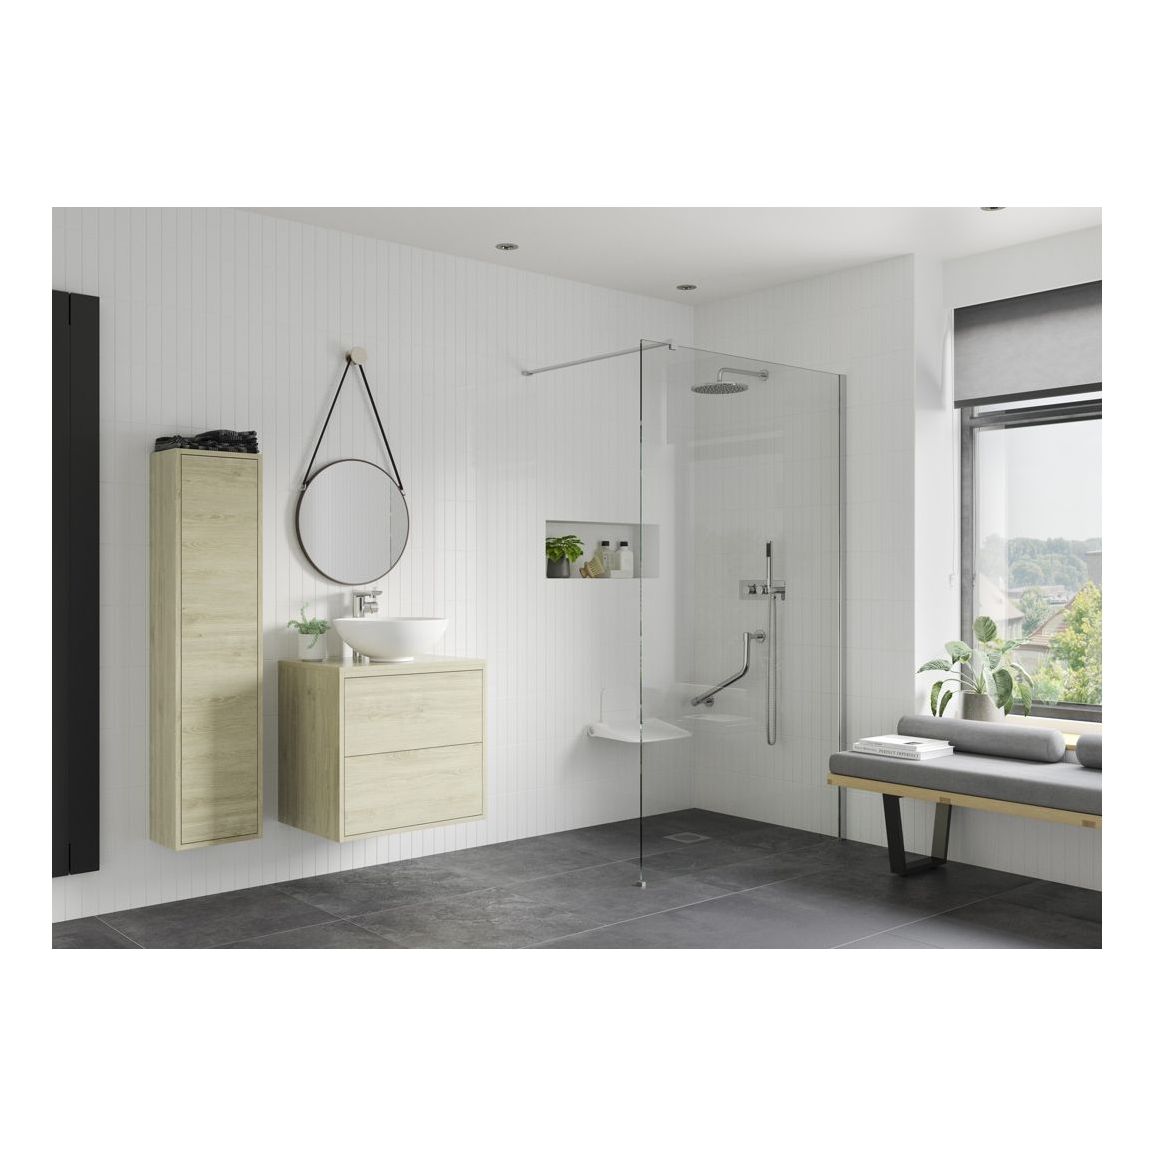 Montague 500mm Wetroom Panel & Floor-to-Ceiling Pole - Chrome